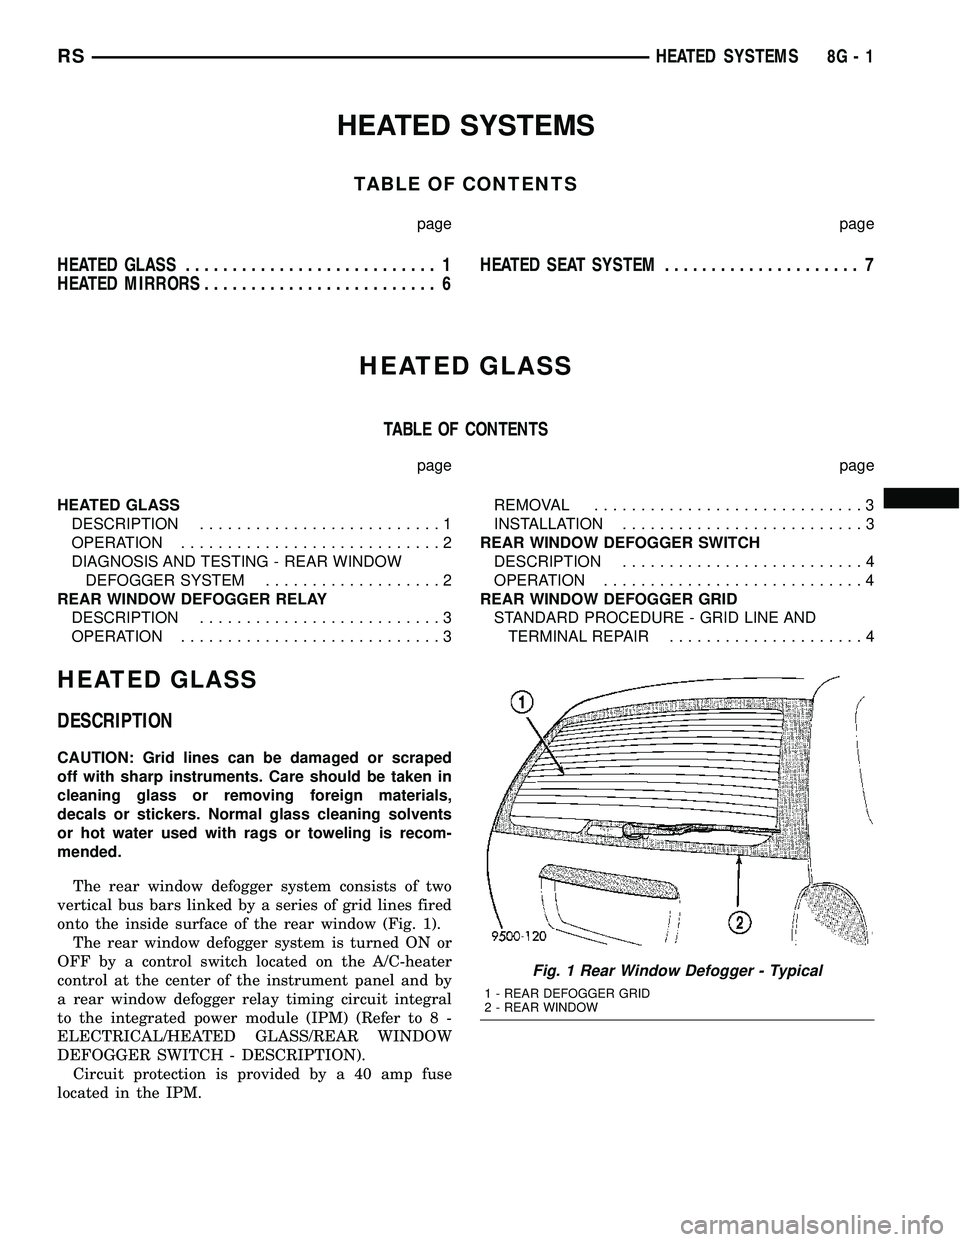 DODGE TOWN AND COUNTRY 2004  Service Manual HEATED SYSTEMS
TABLE OF CONTENTS
page page
HEATED GLASS........................... 1
HEATED MIRRORS......................... 6HEATED SEAT SYSTEM..................... 7
HEATED GLASS
TABLE OF CONTENTS
p